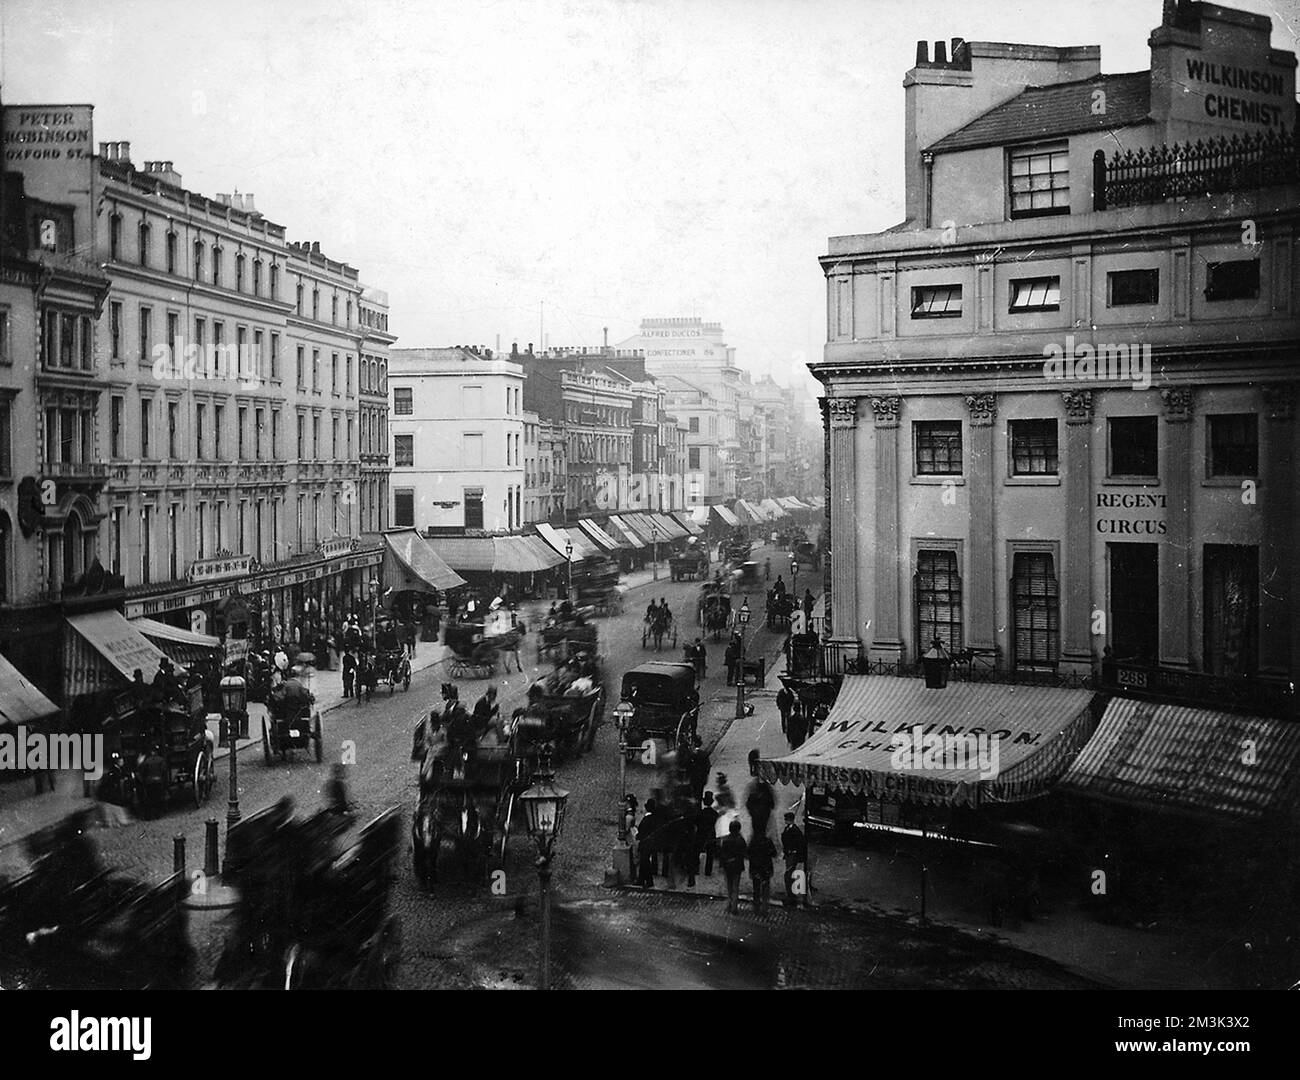 Photograph showing part of Oxford Circus (also known as Regent Circus), London, c.1880.      The horse-drawn carriages travelling along Oxford Street appear blurred, due to the length of exposure used by the photographer.     Date: c.1880. Stock Photo